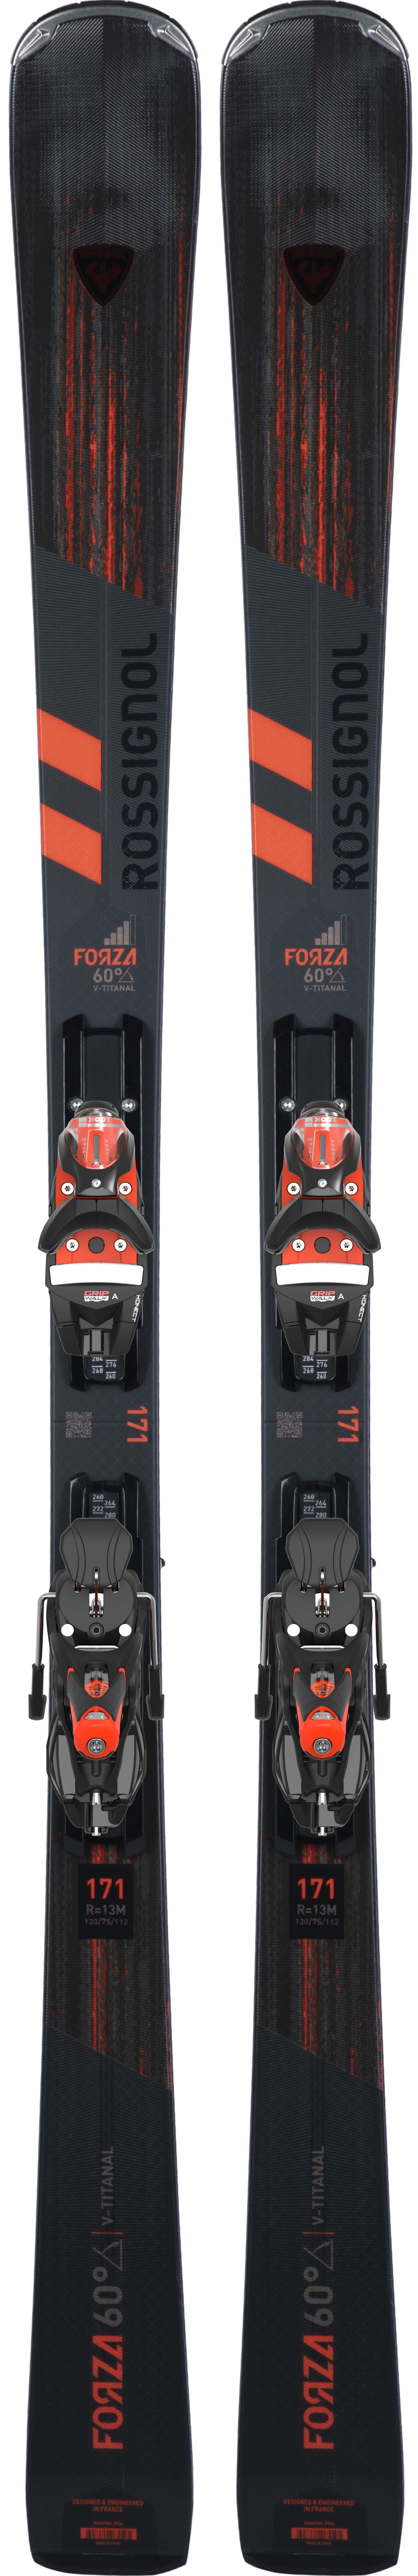 rossignol-forza-skis